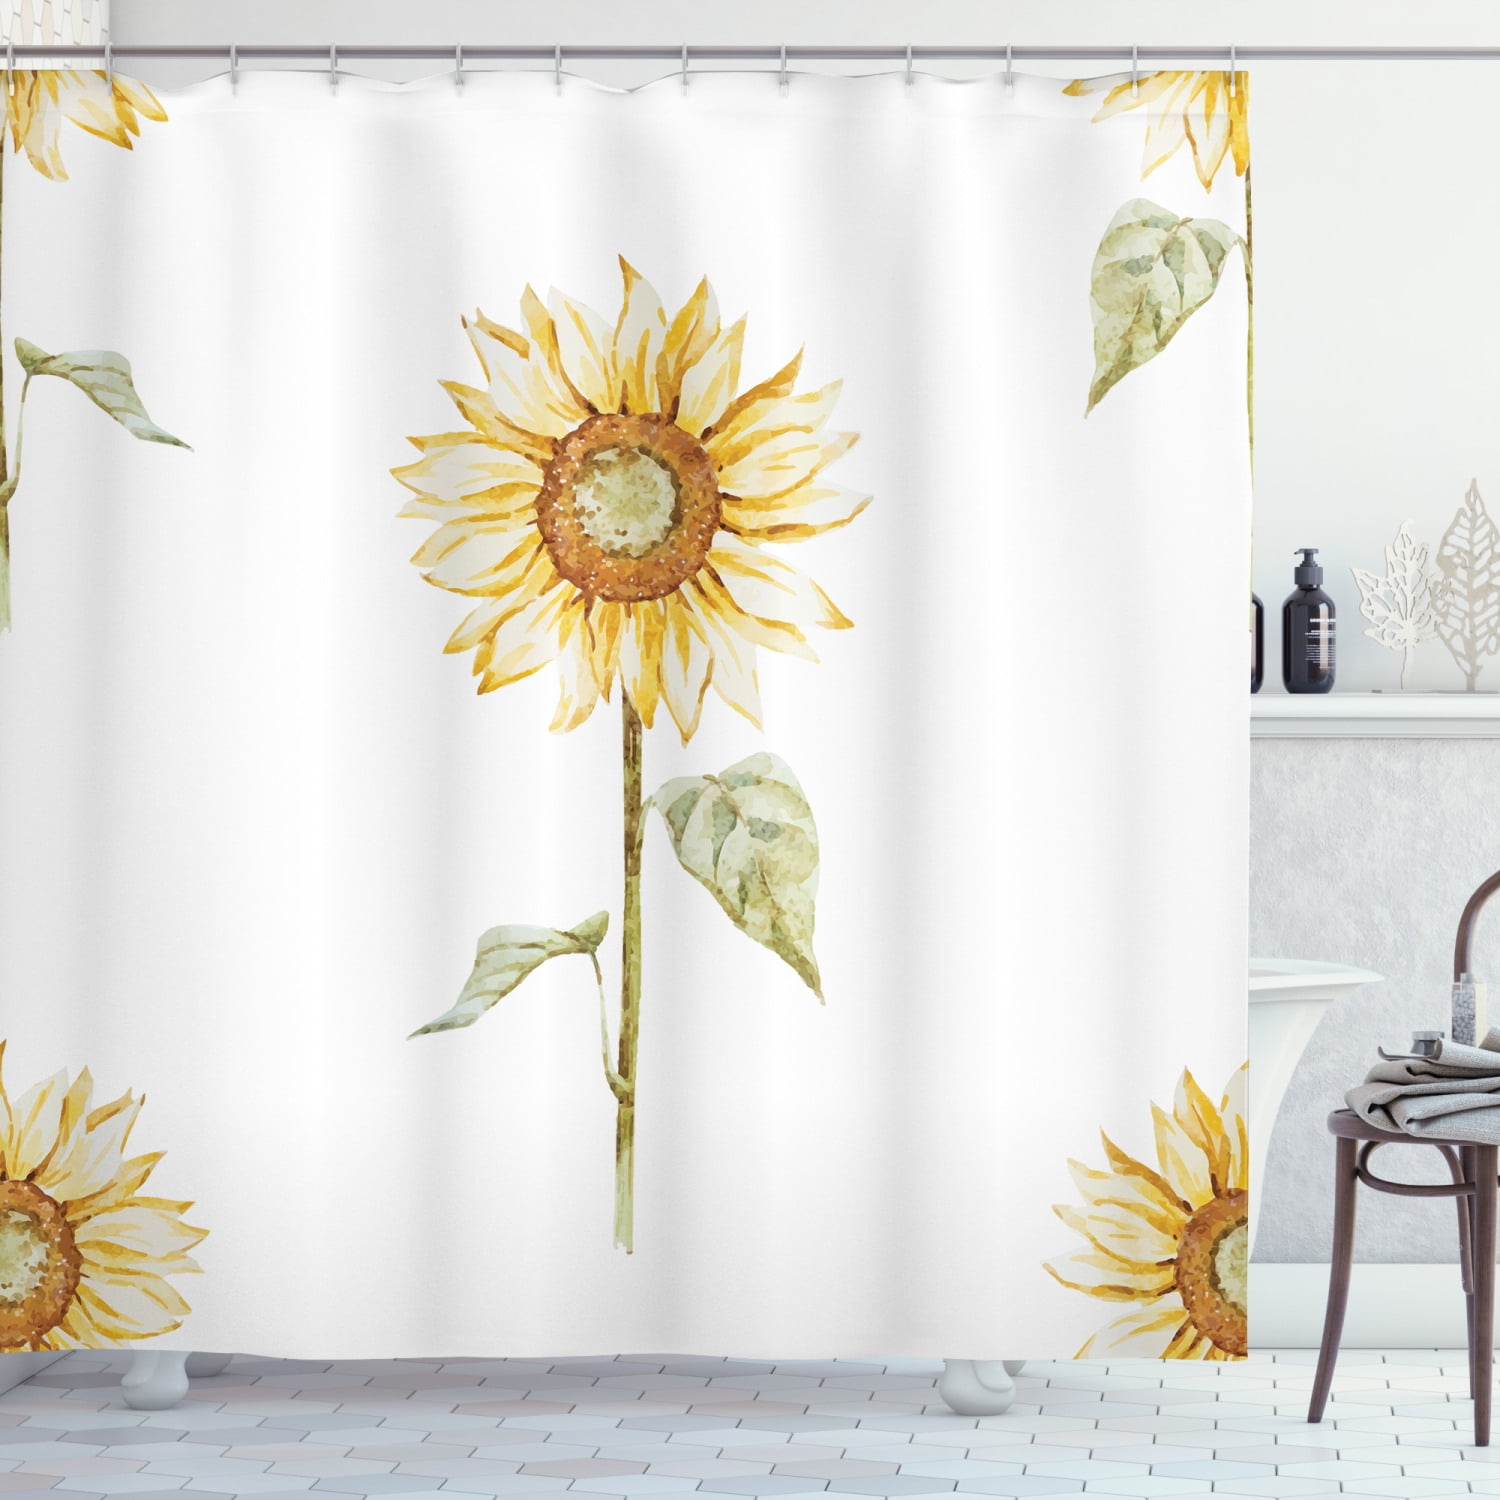 Details about   Pumpkin and Sunflower Shower Curtain Bath Curtain Decor Fabric 71 In 